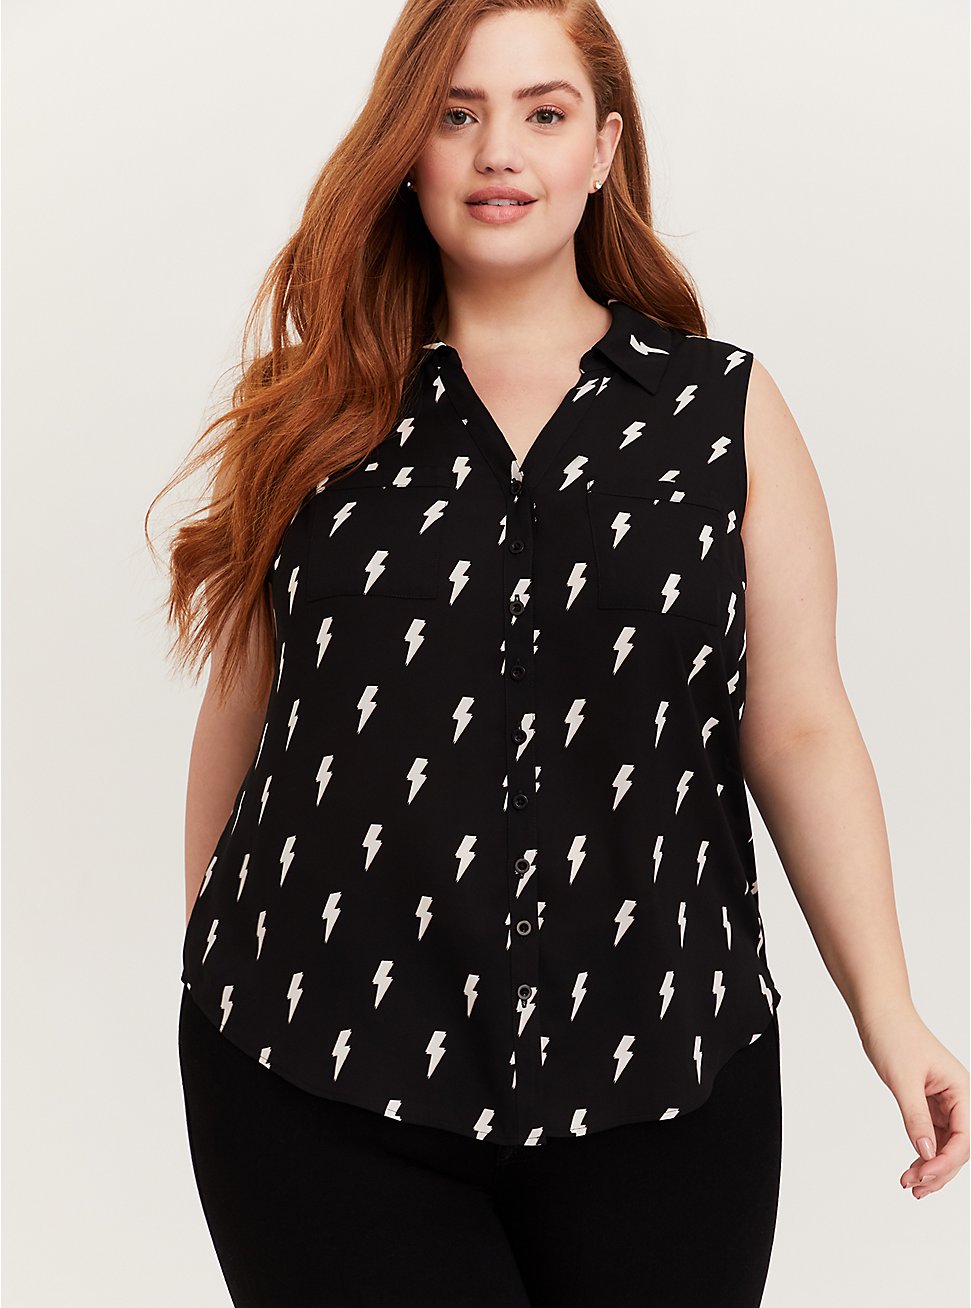 Black Georgette & White Bolt Button Front Tank up through size 6X at Torrid